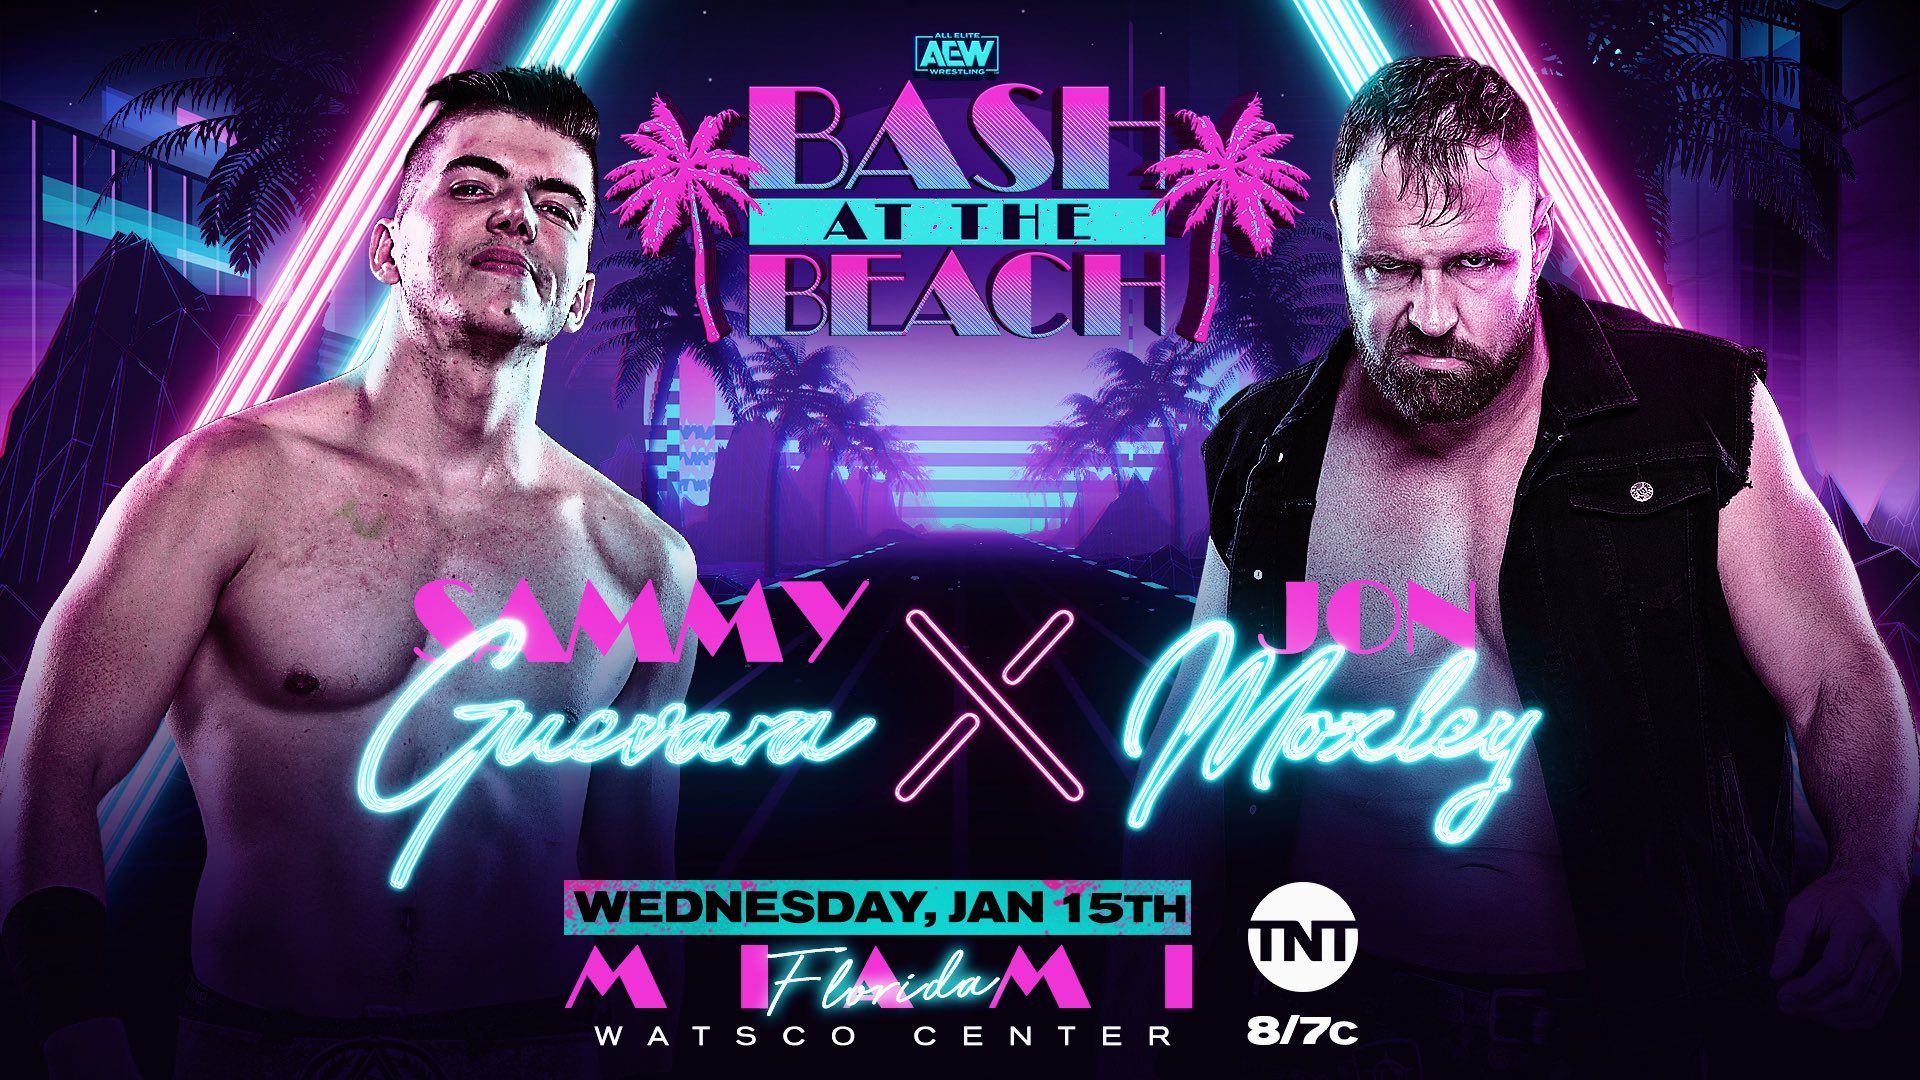 AEW BASH AT THE BEACH Results For January 2020: Jon Moxley VS Sammy Guevara And More